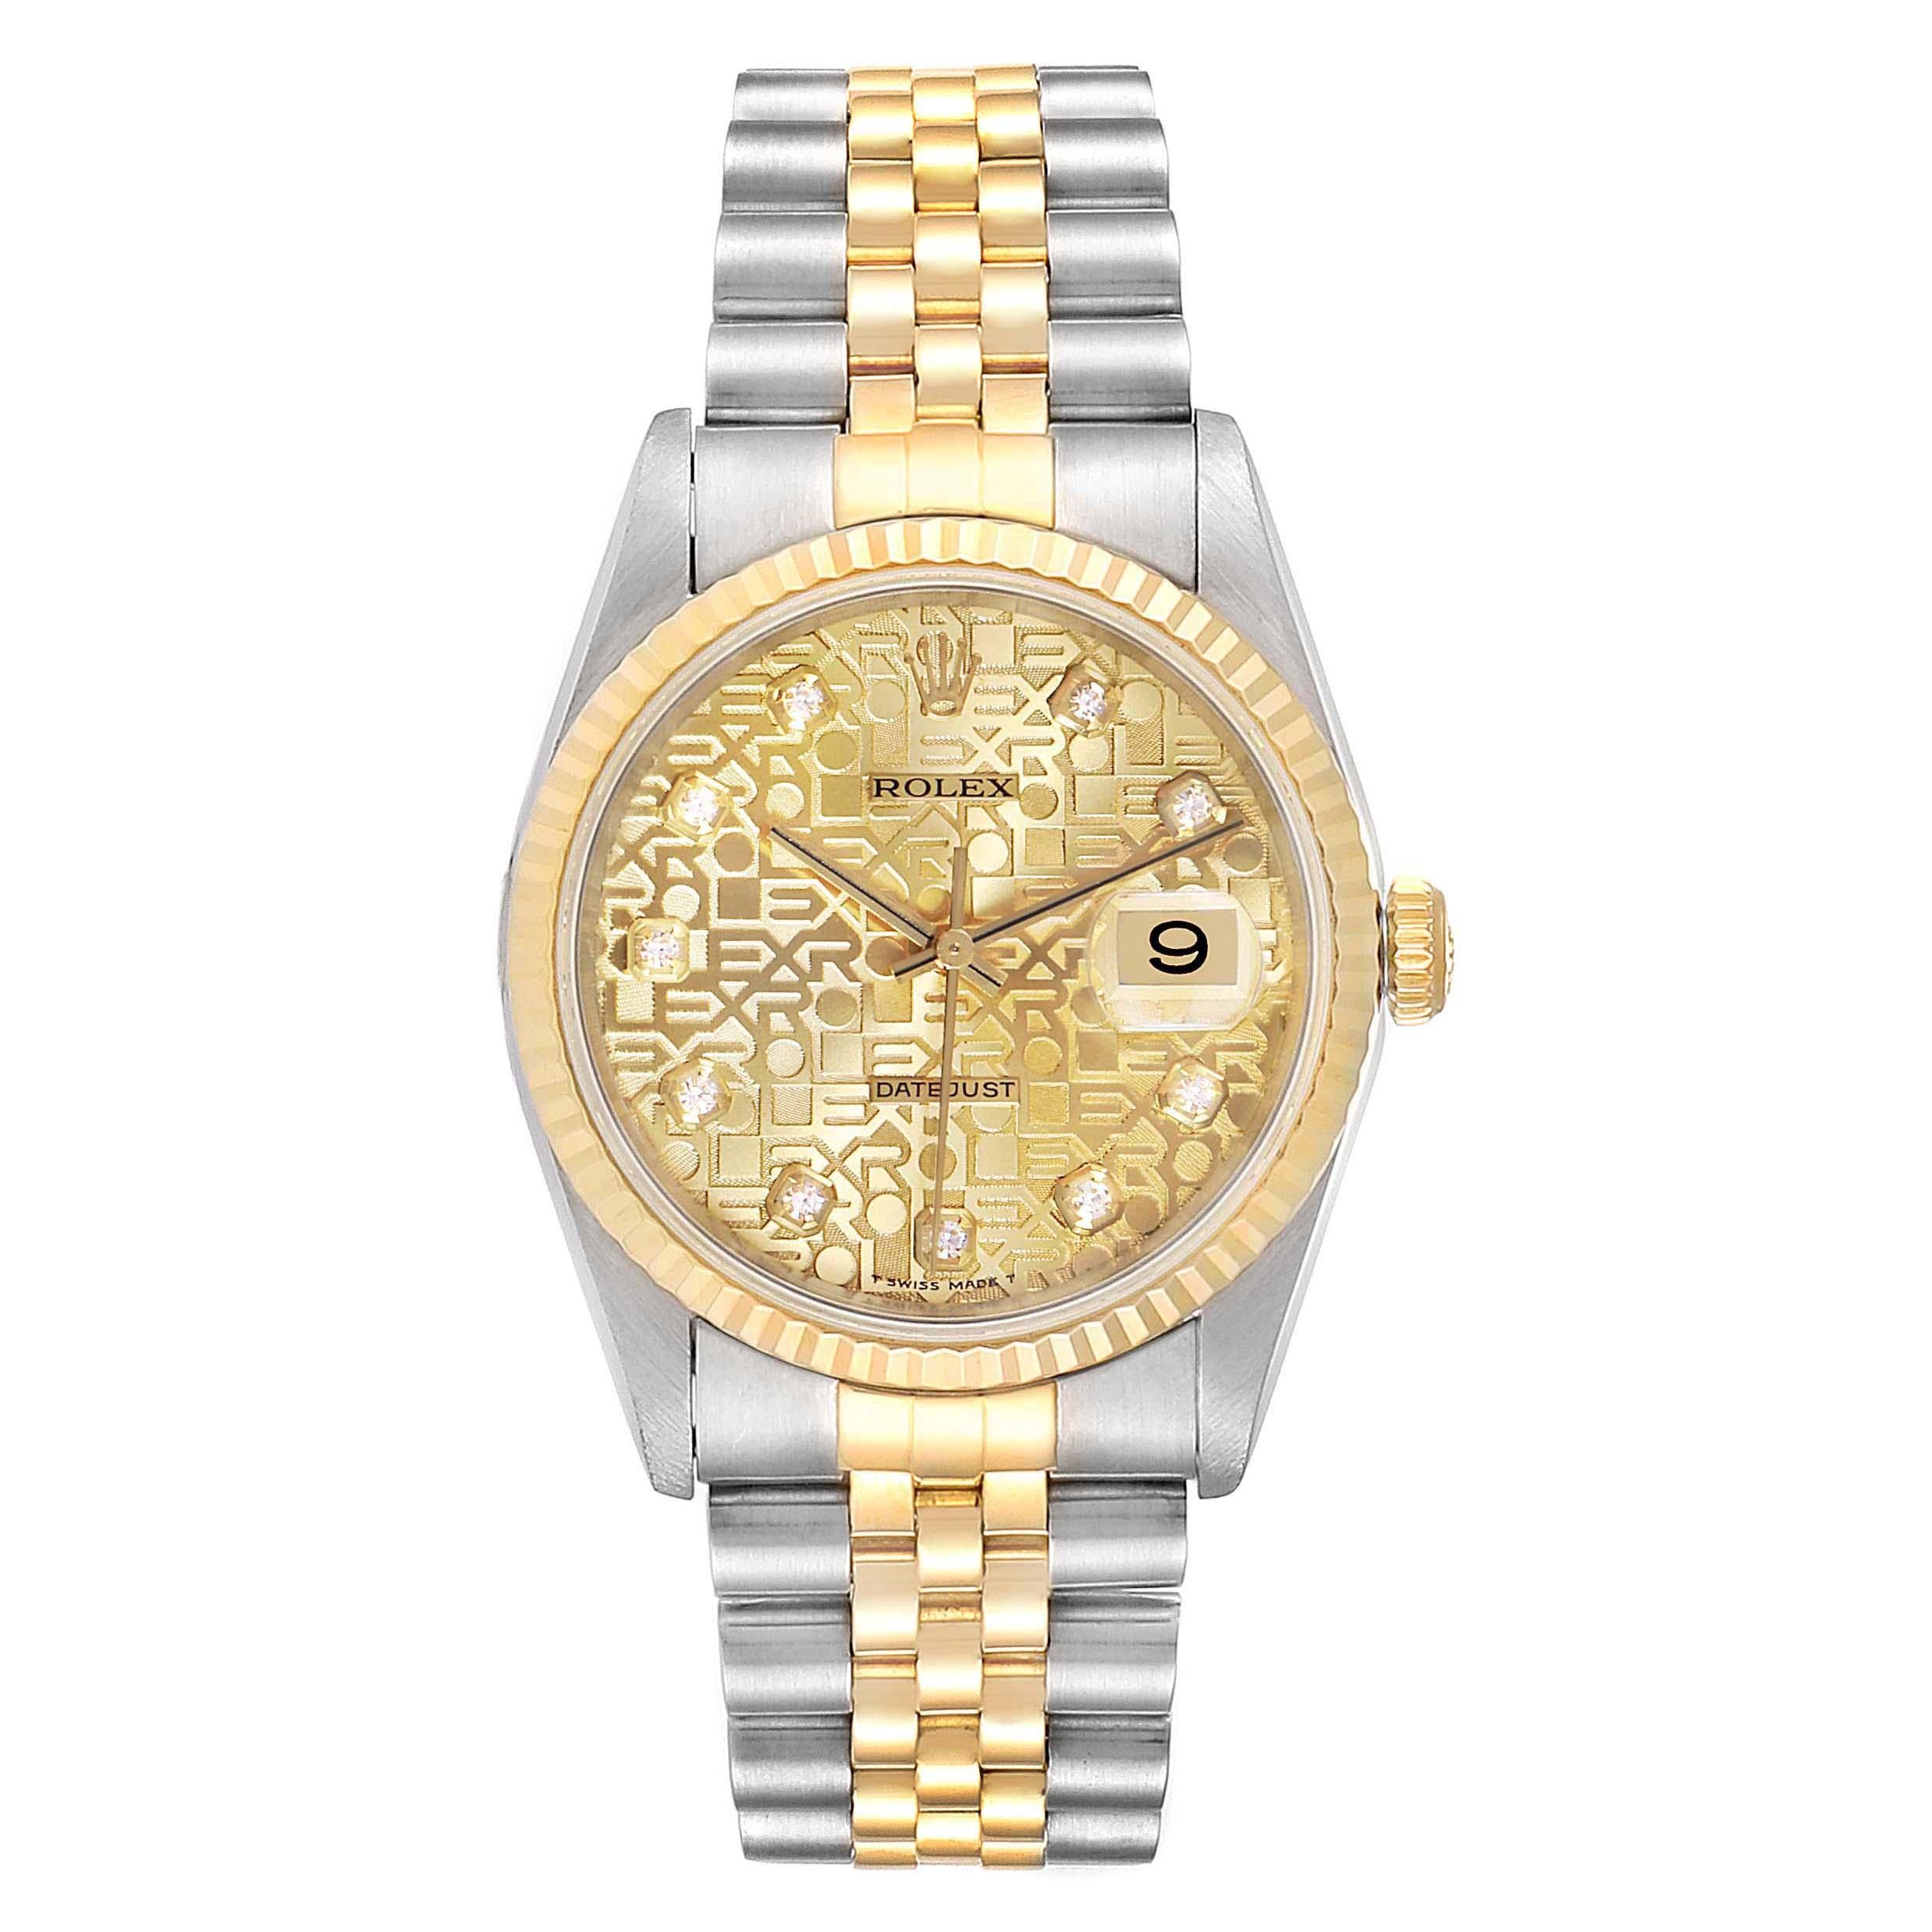 Rolex Datejust Steel Yellow Gold Diamond Mens Watch 16233 Box. Officially certified chronometer self-winding movement. Stainless steel case 36 mm in diameter. Rolex logo on a 18K yellow gold crown. 18k yellow gold fluted bezel. Scratch resistant